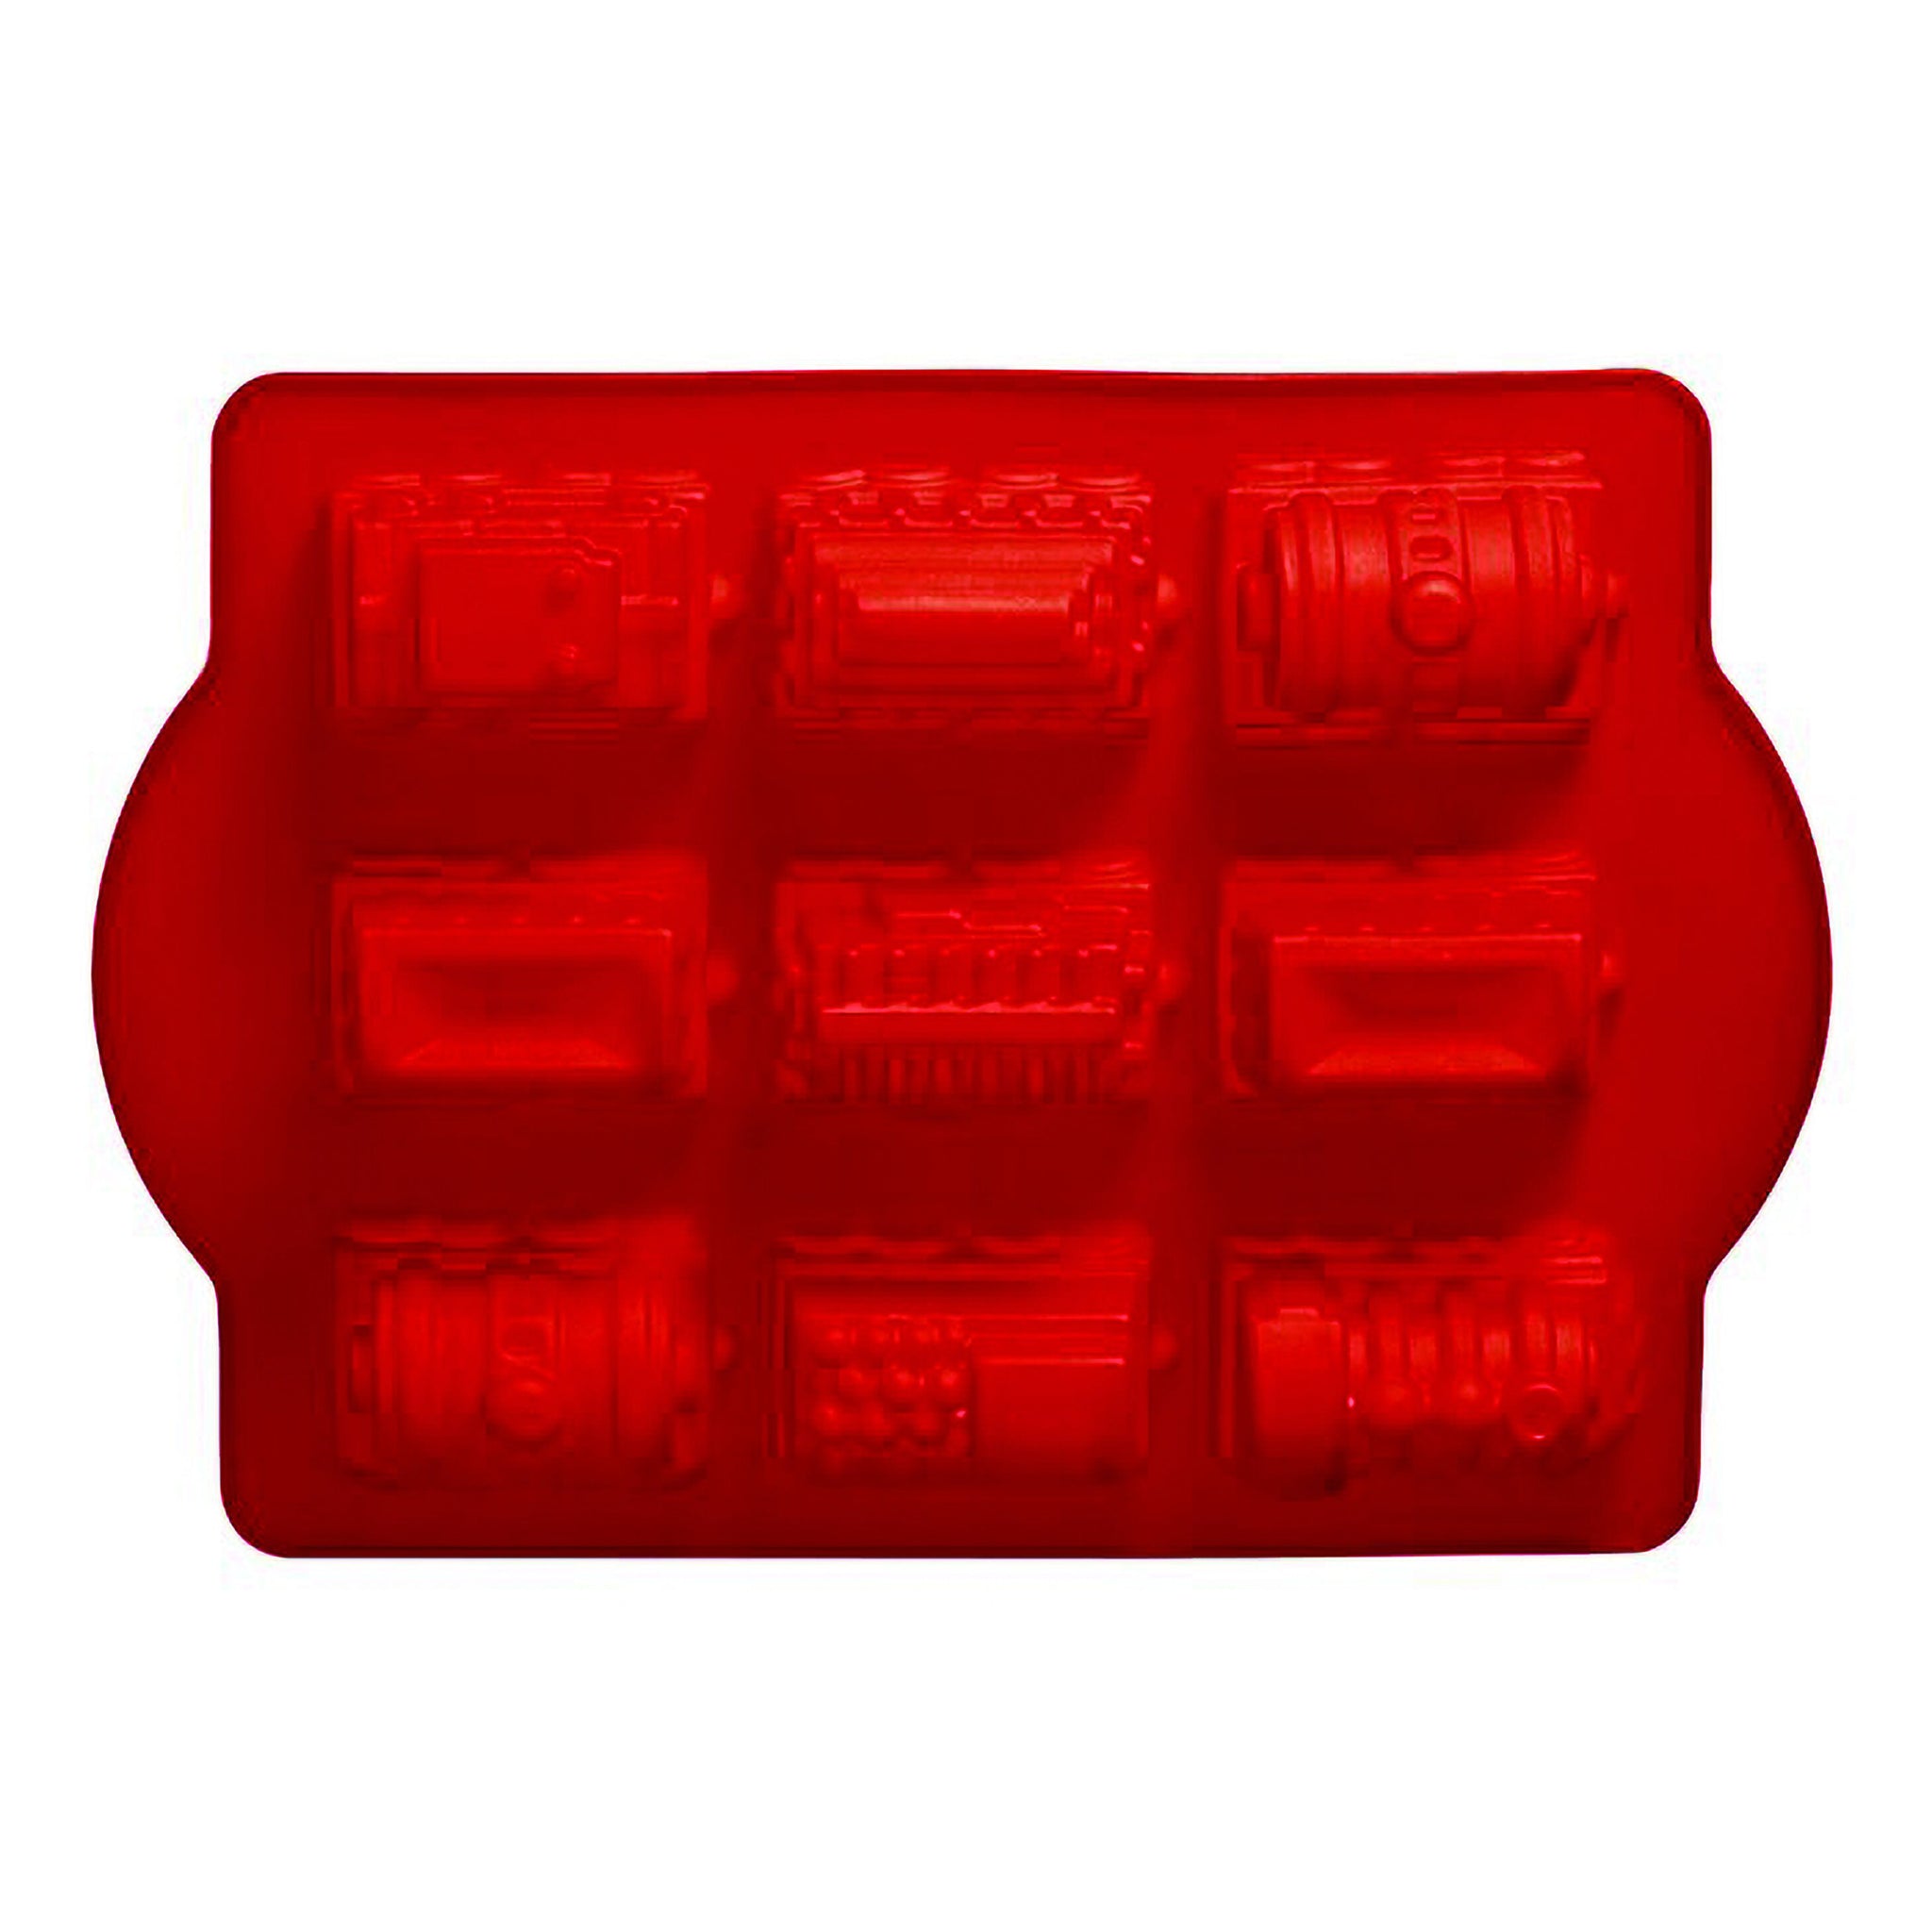 Assorted Train Shapes Silicone Cake Mould